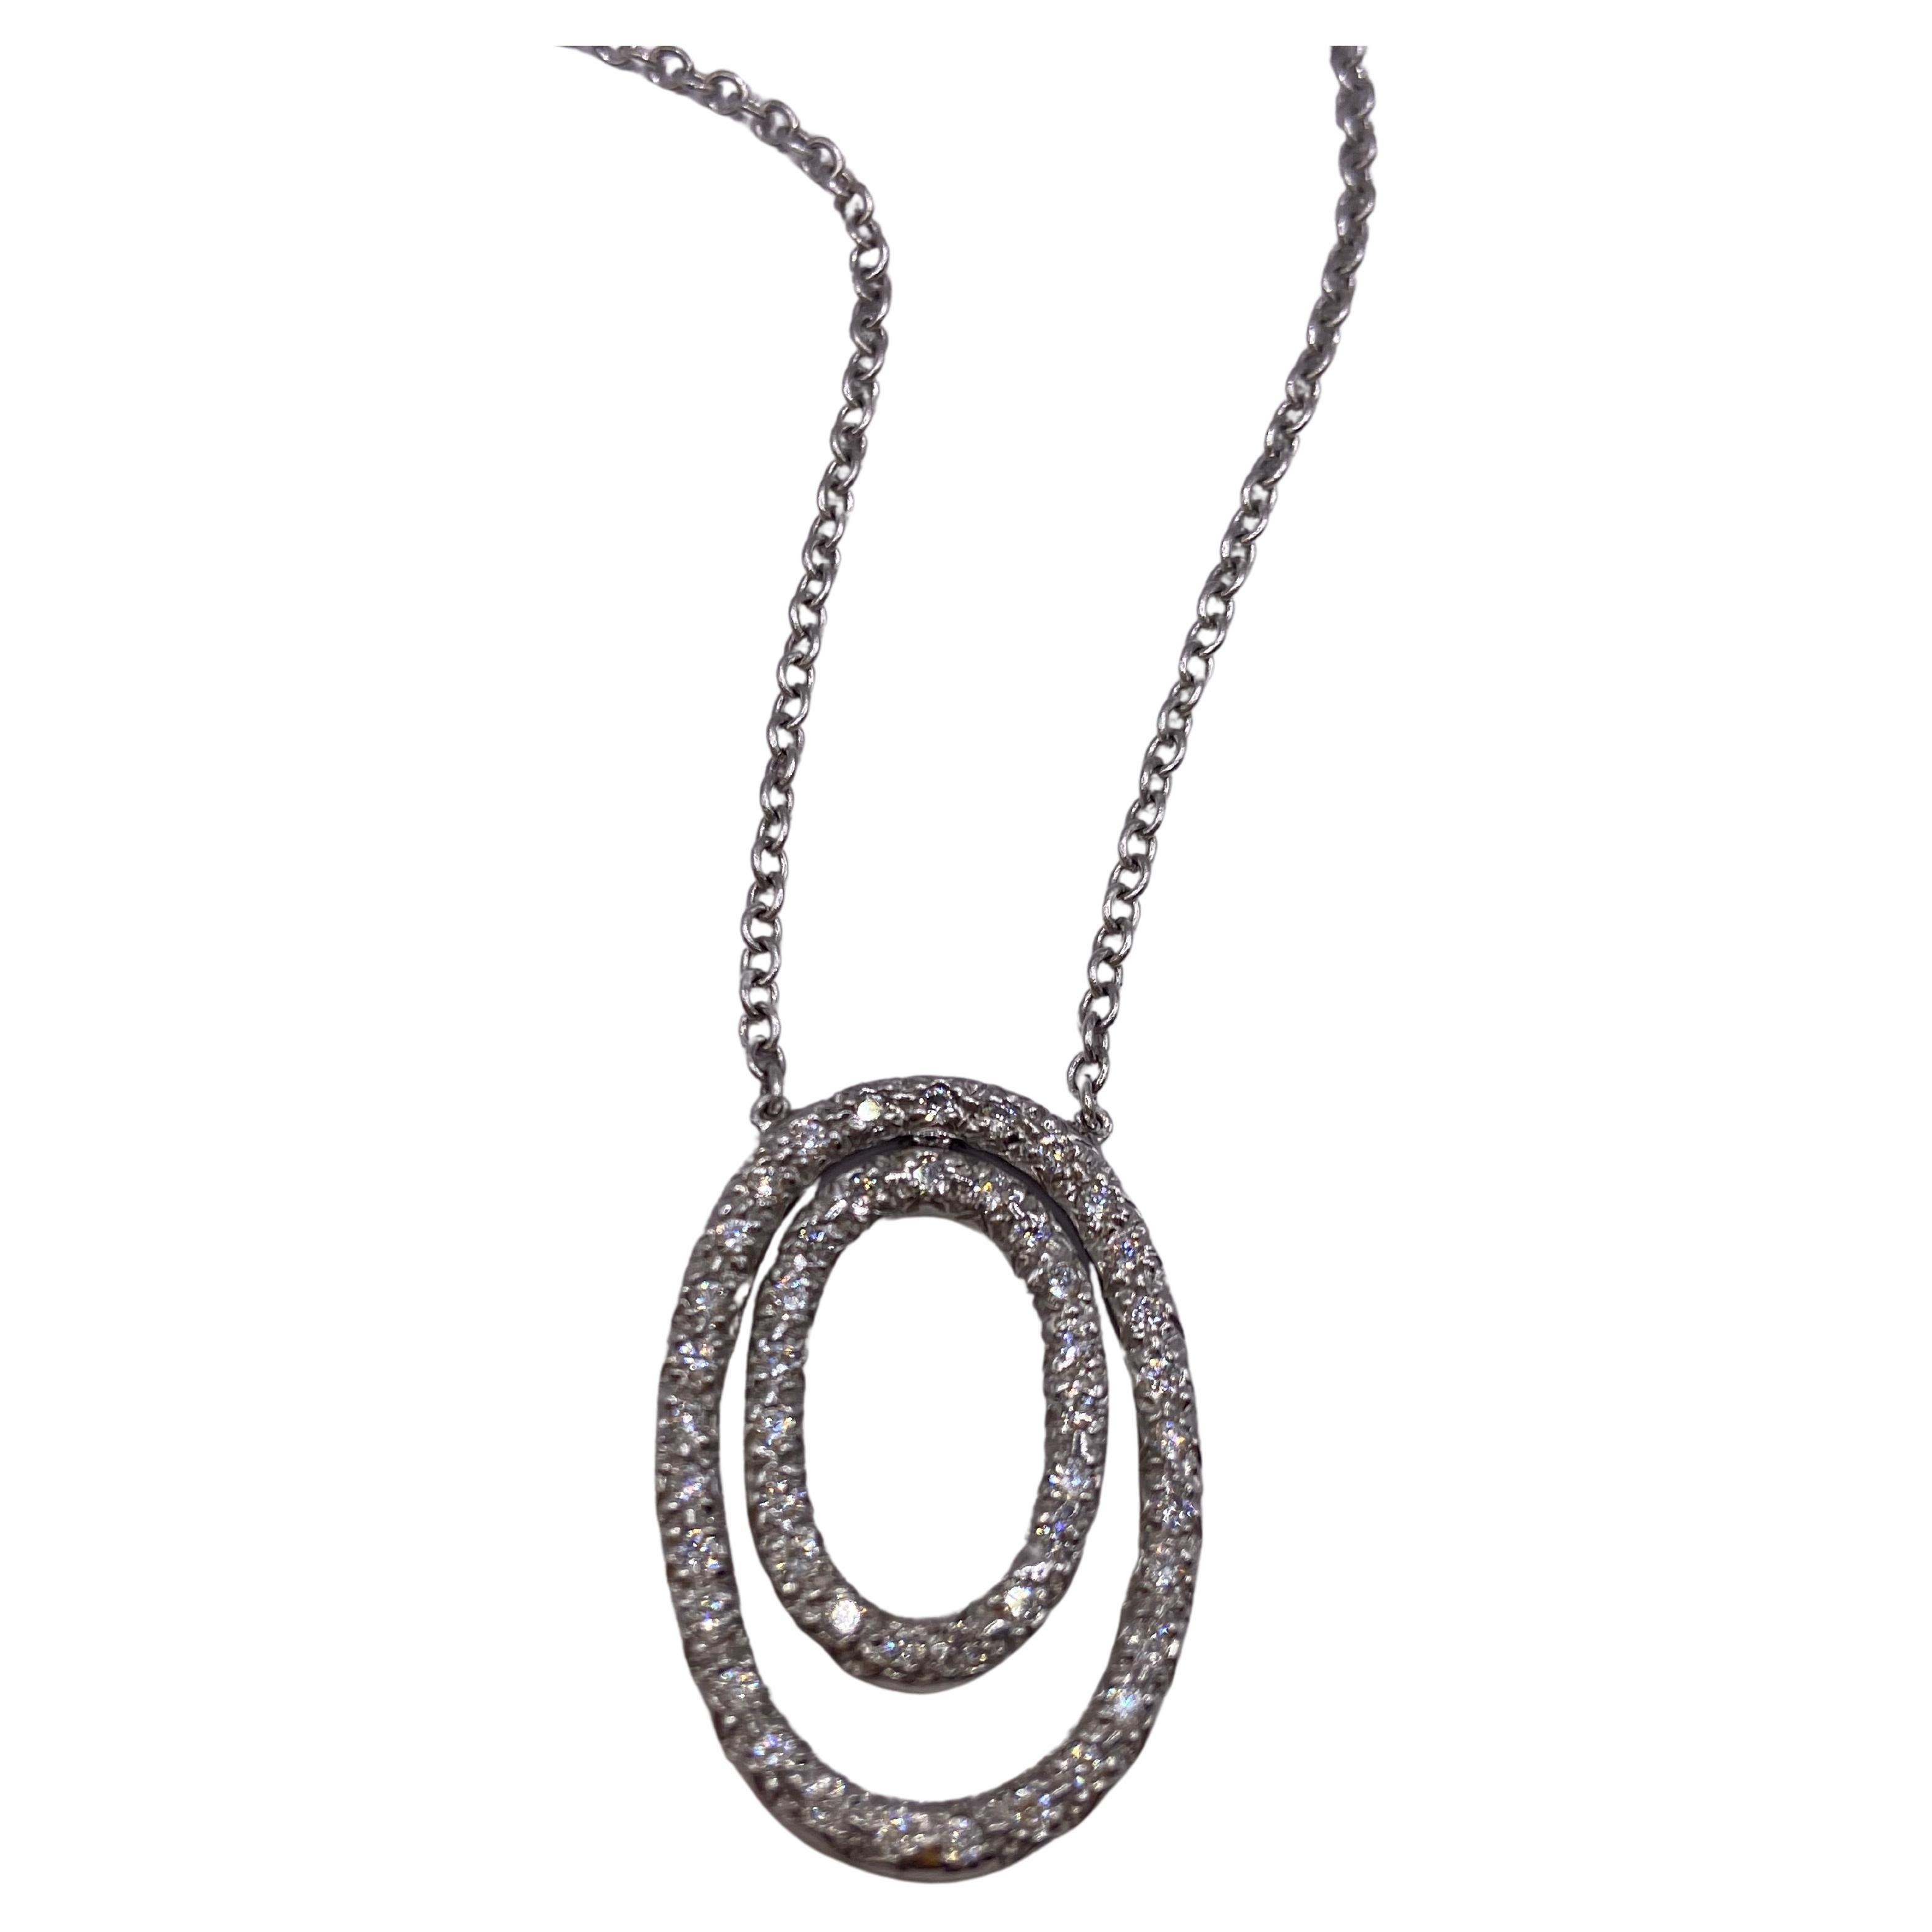 Metal: 18KT White Gold
Chain Length:  15